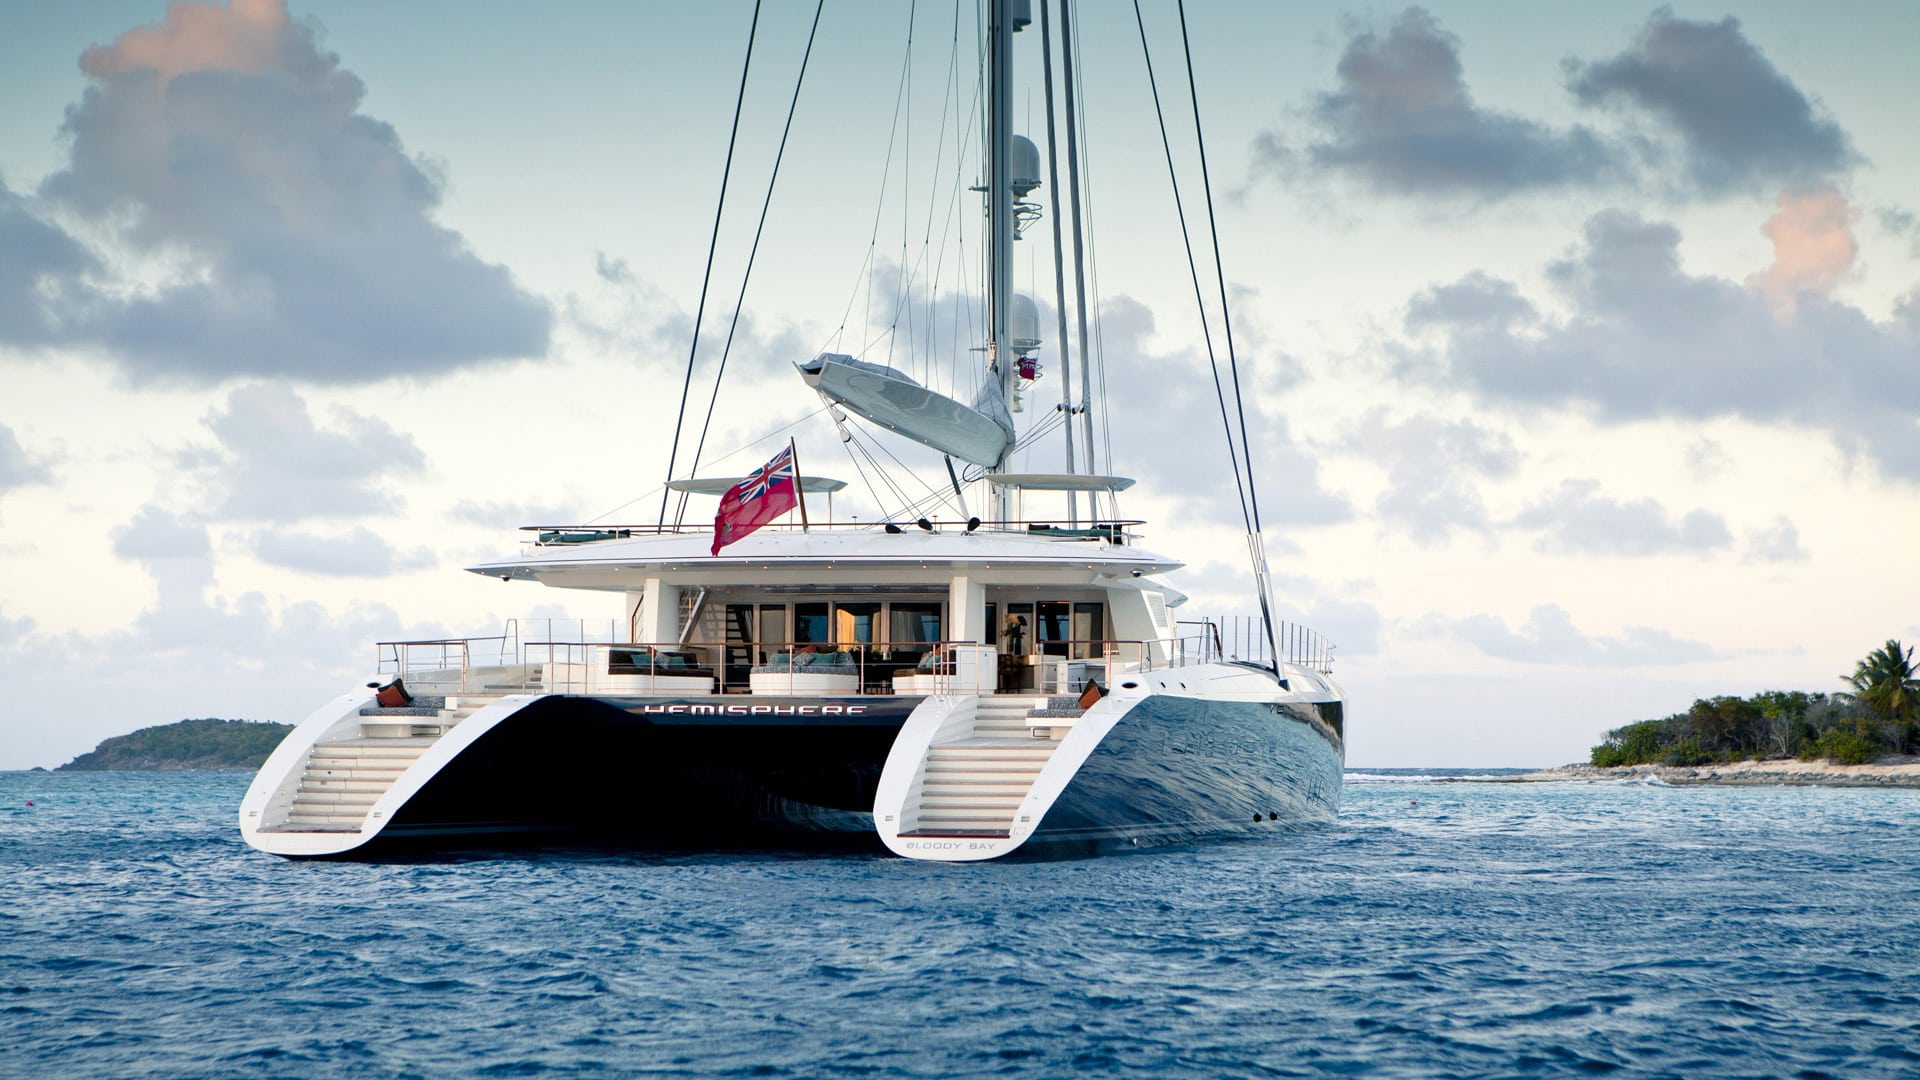 yachts for sale under 20 million dollars